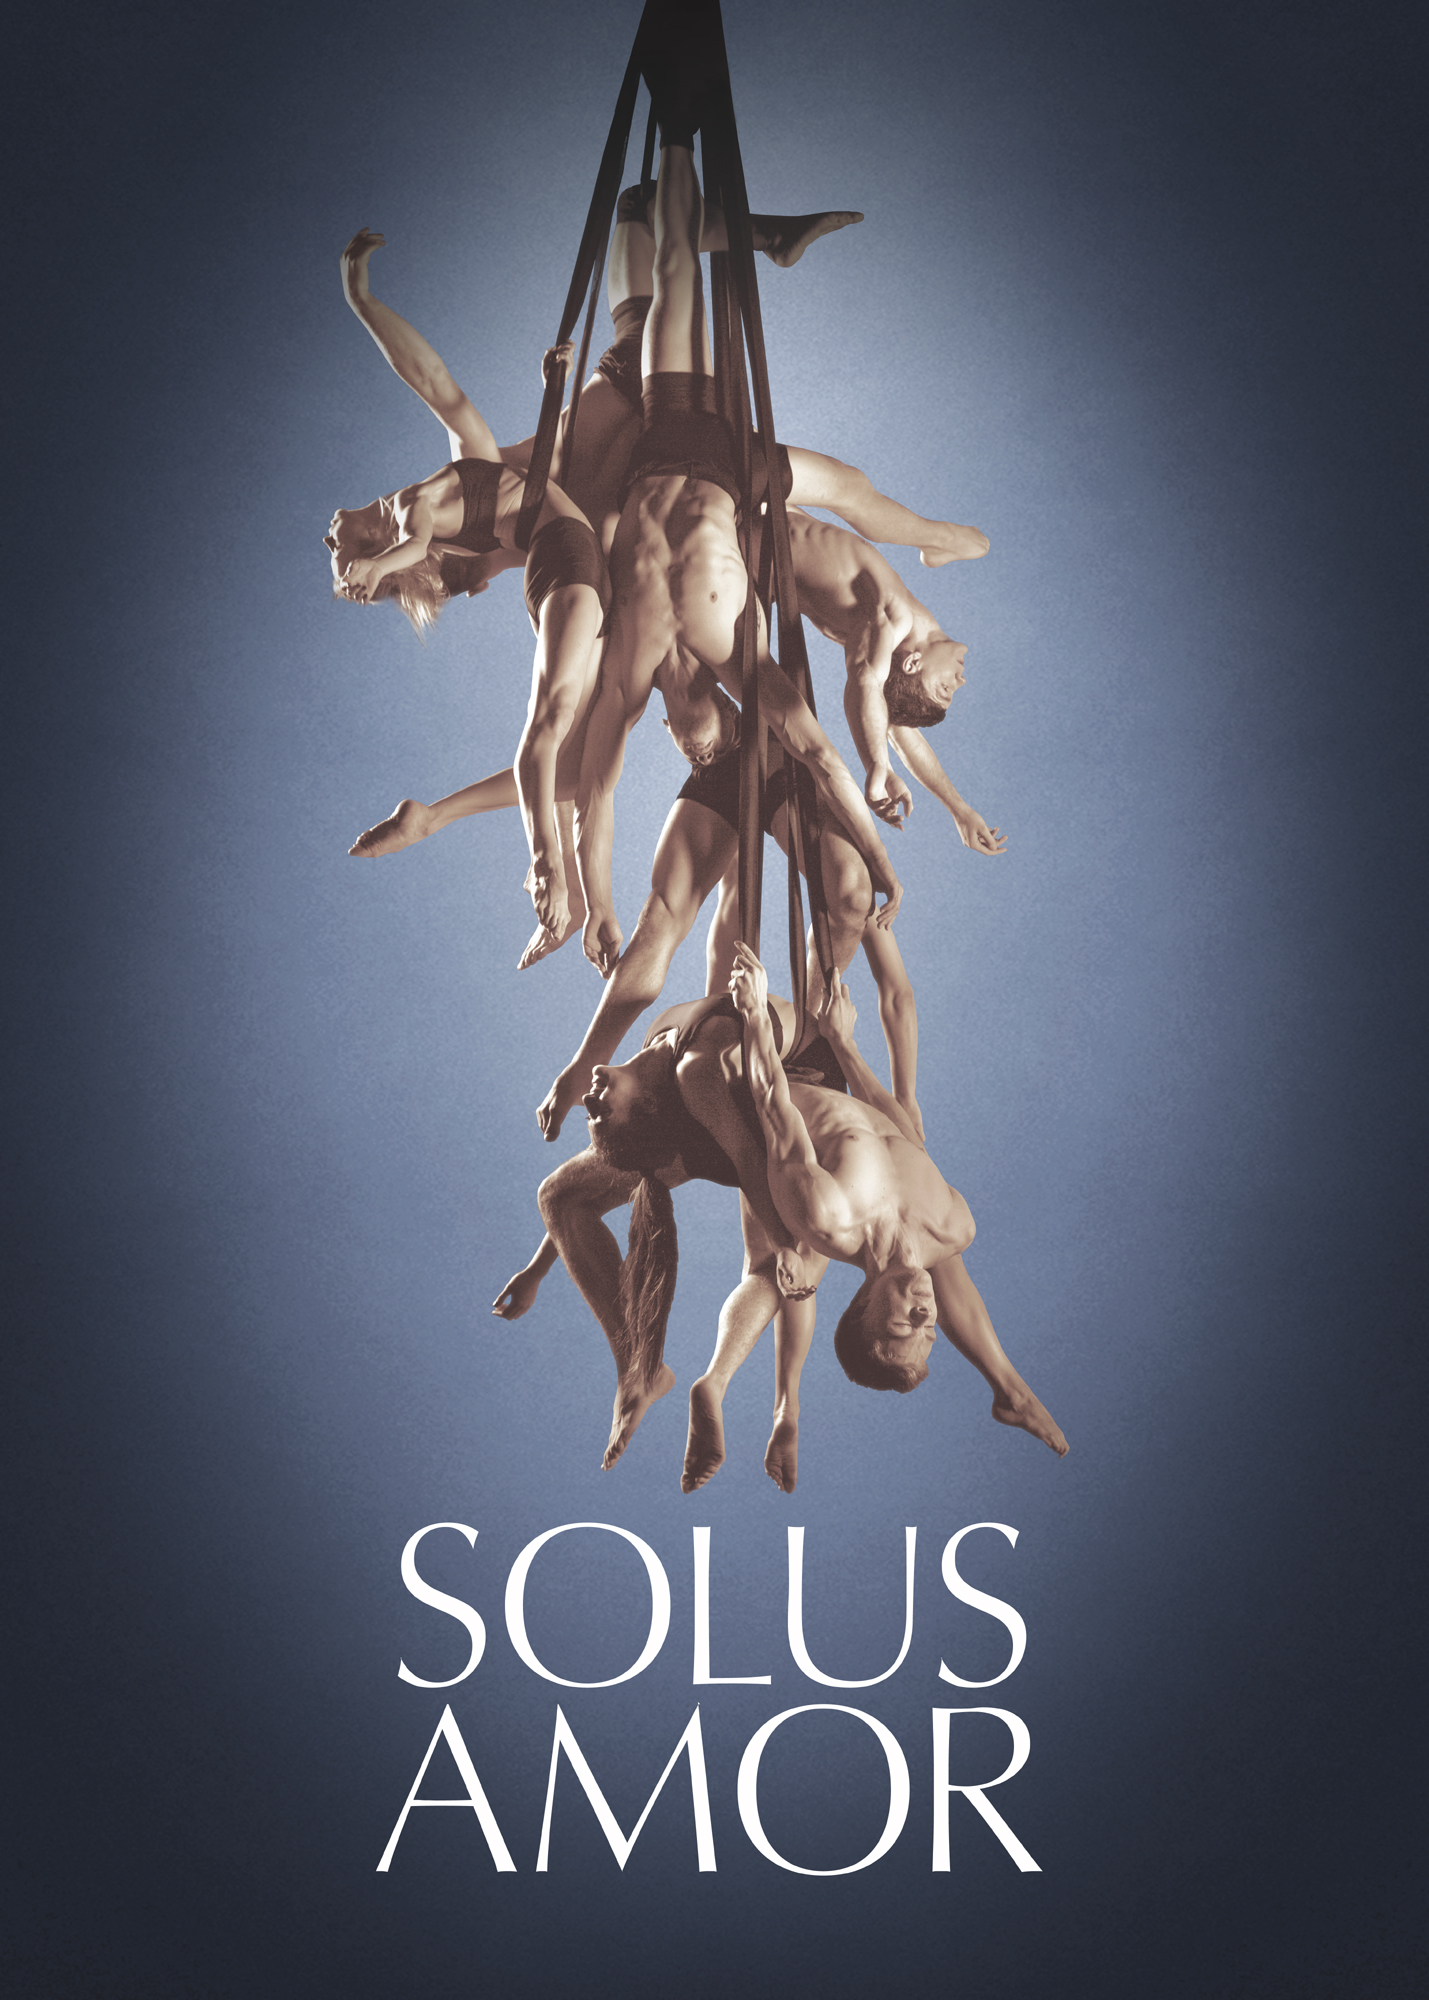 Watch the teaser trailer of Solus Amor, our new show in the making!